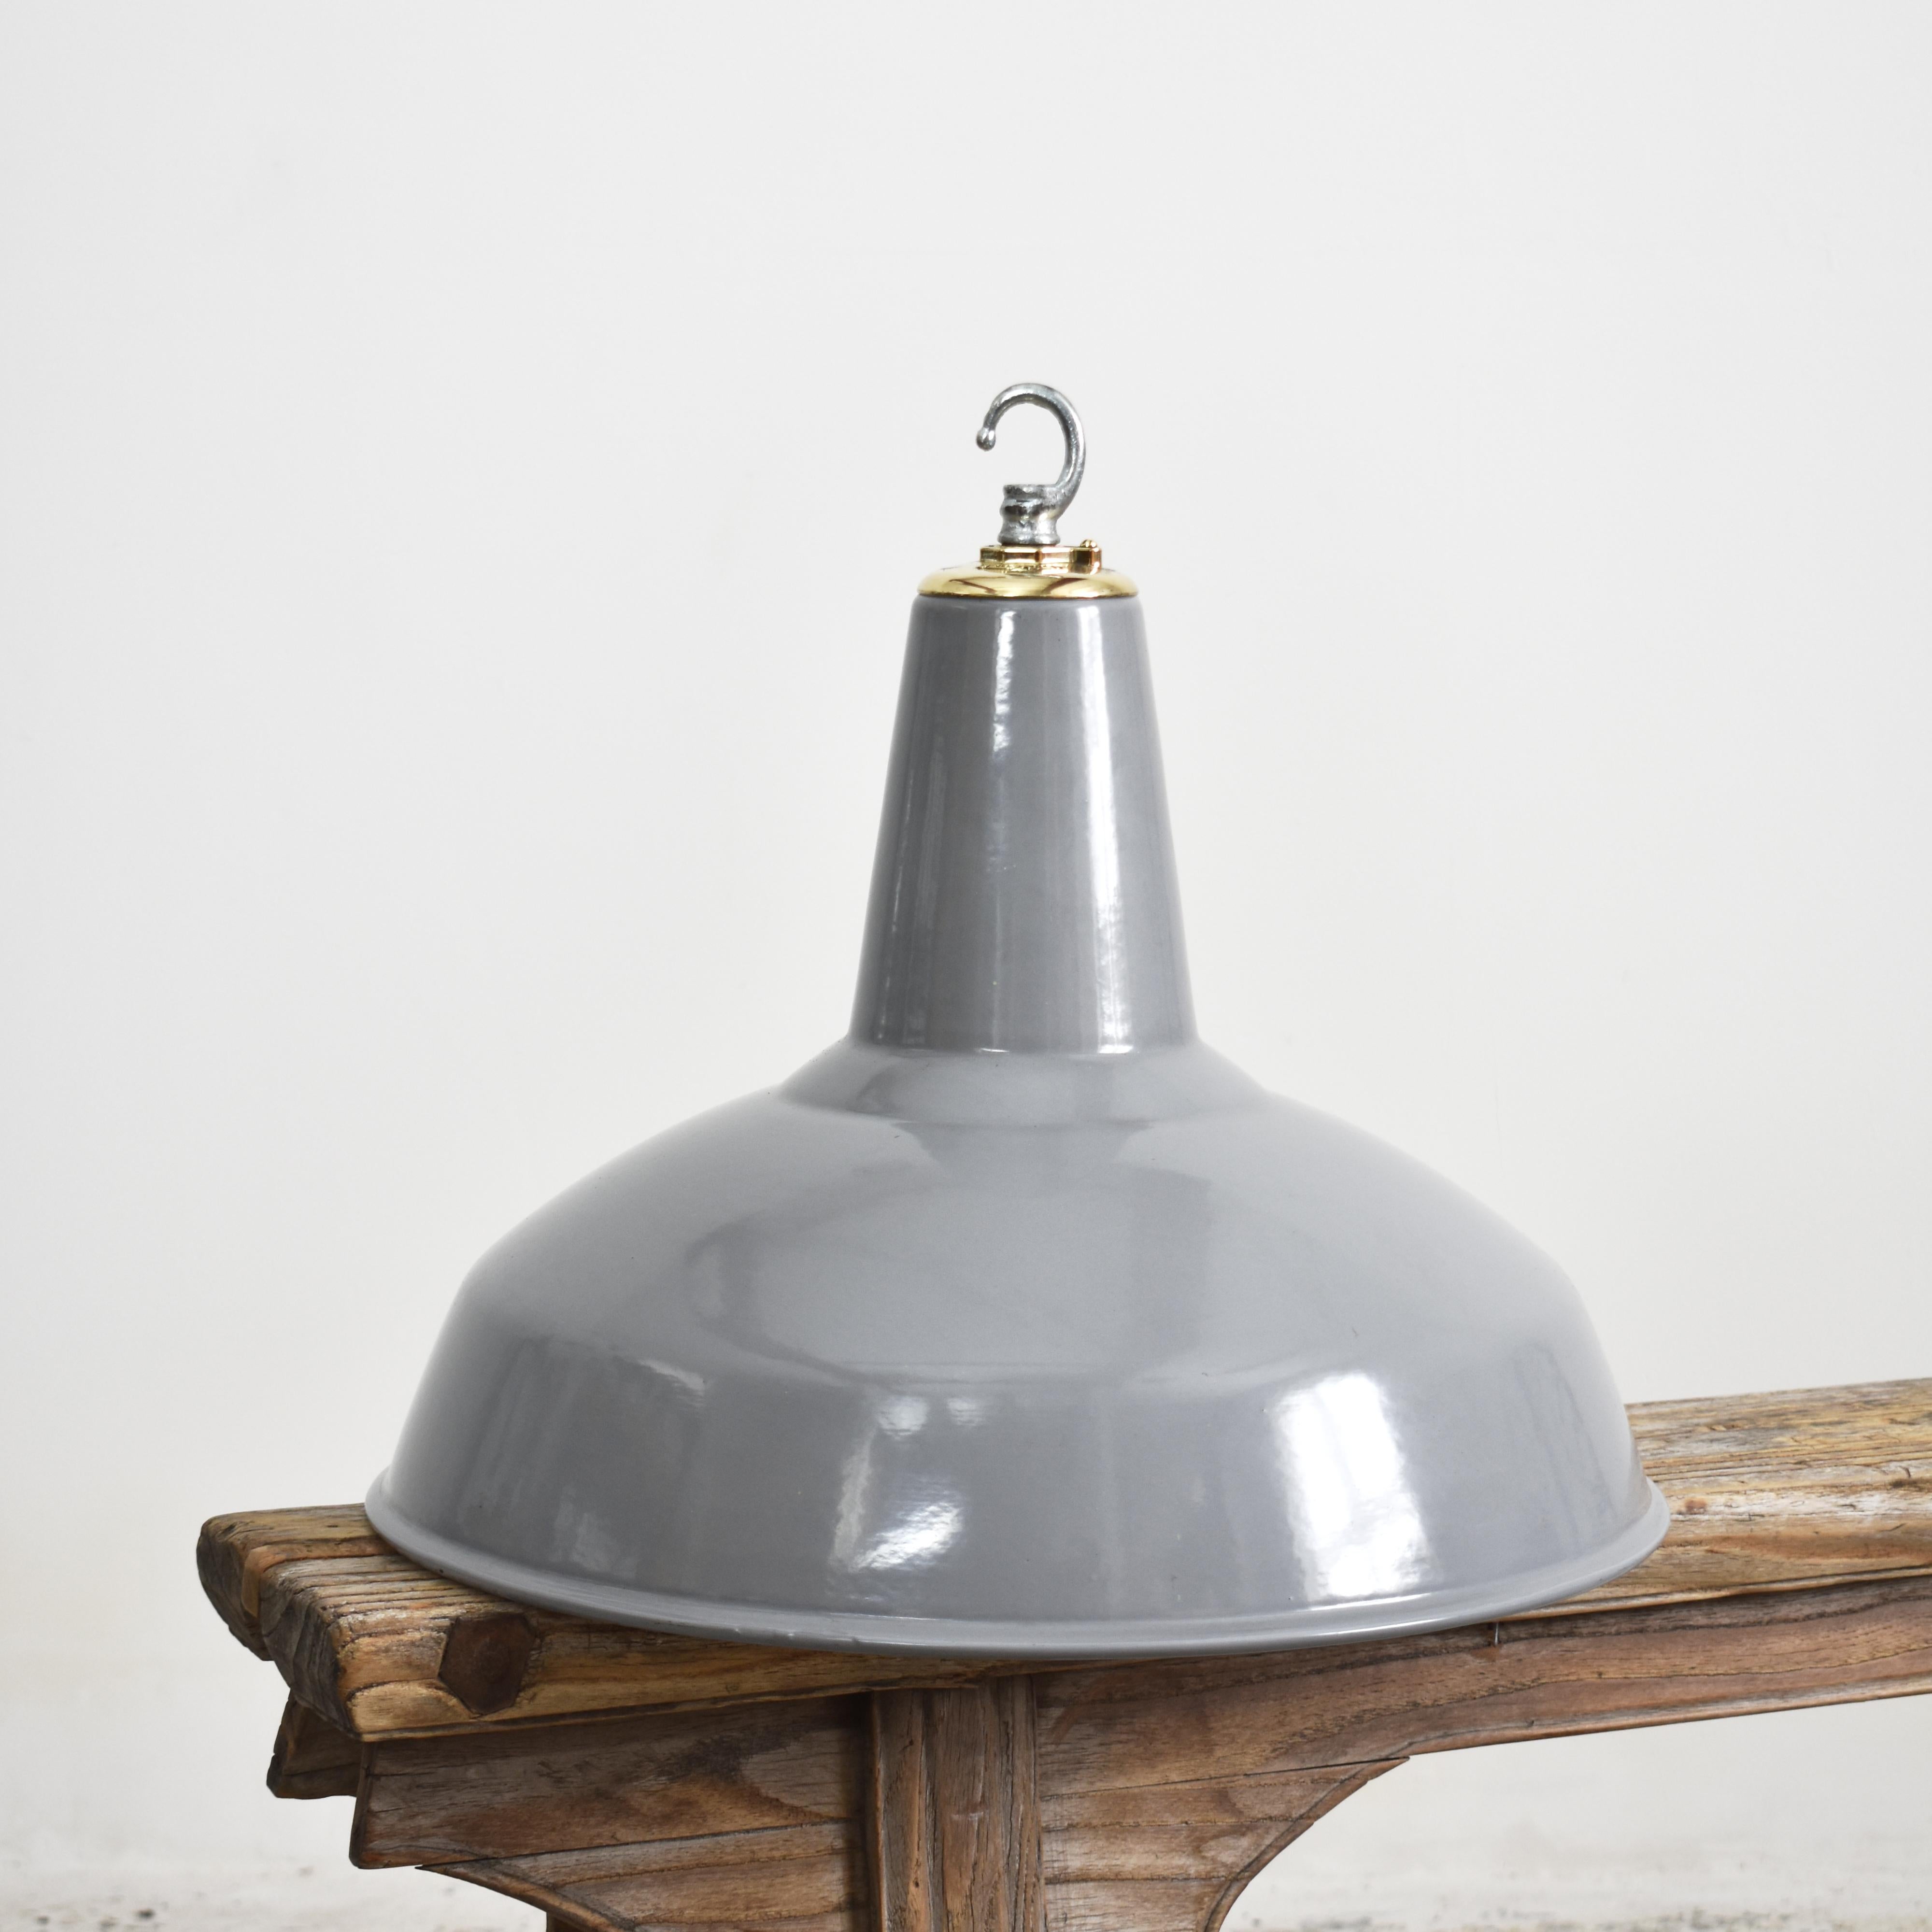 18″ Antique Industrial Grey Factory Pendant Light By Benjamin -A

A large iconic industrial factory light shade manufactured by Benjamin Crysteel. The light shade is a spun vitreous glass grey enamel pendant and has retained its original brass X